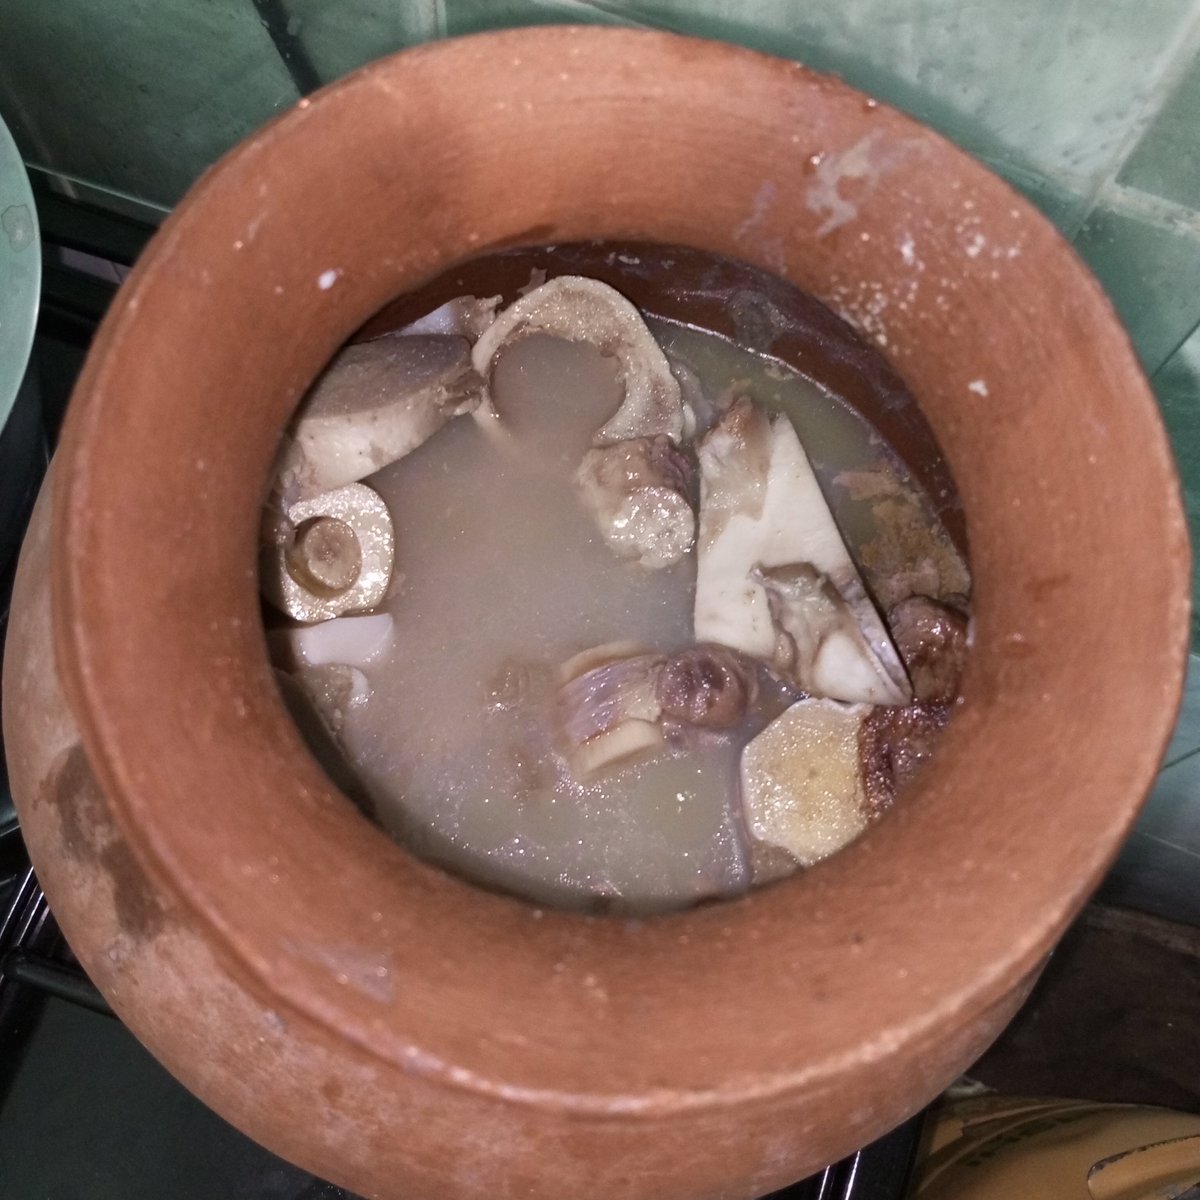 Boiling Bone soup.
#MyFoodIsAfrican